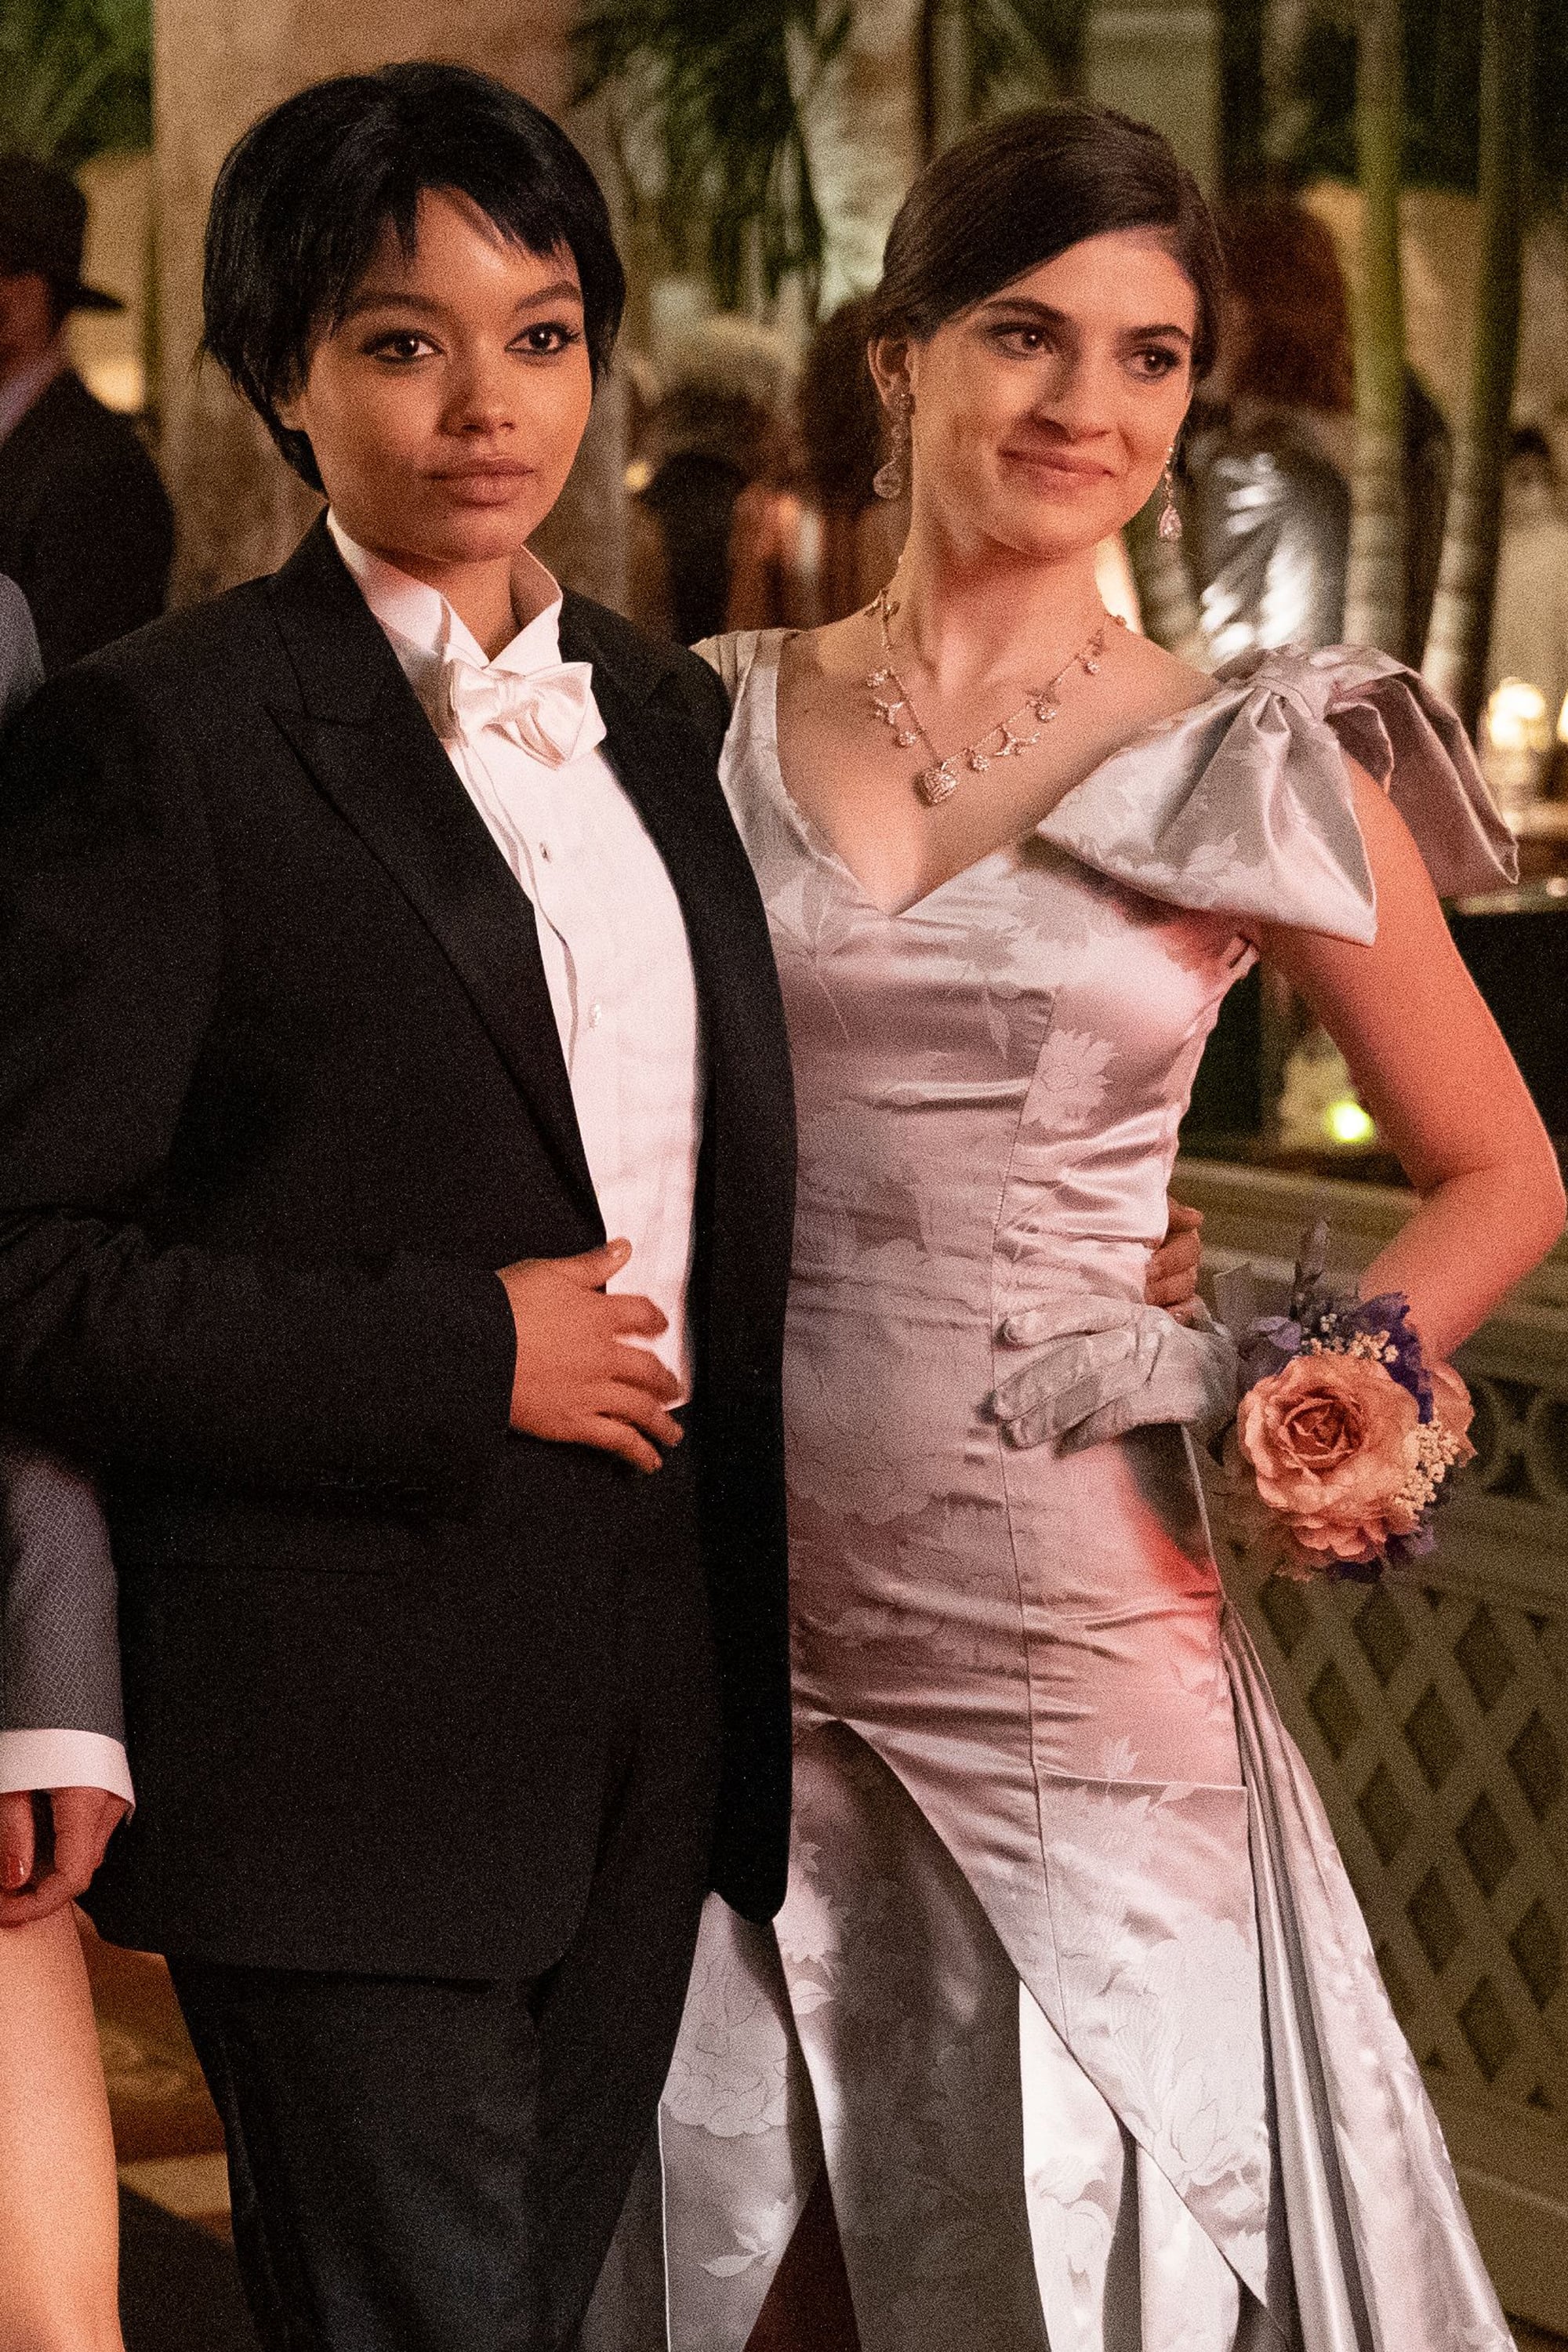 Gossip Girl See The Costumes From The Halloween Episode Popsugar Entertainment